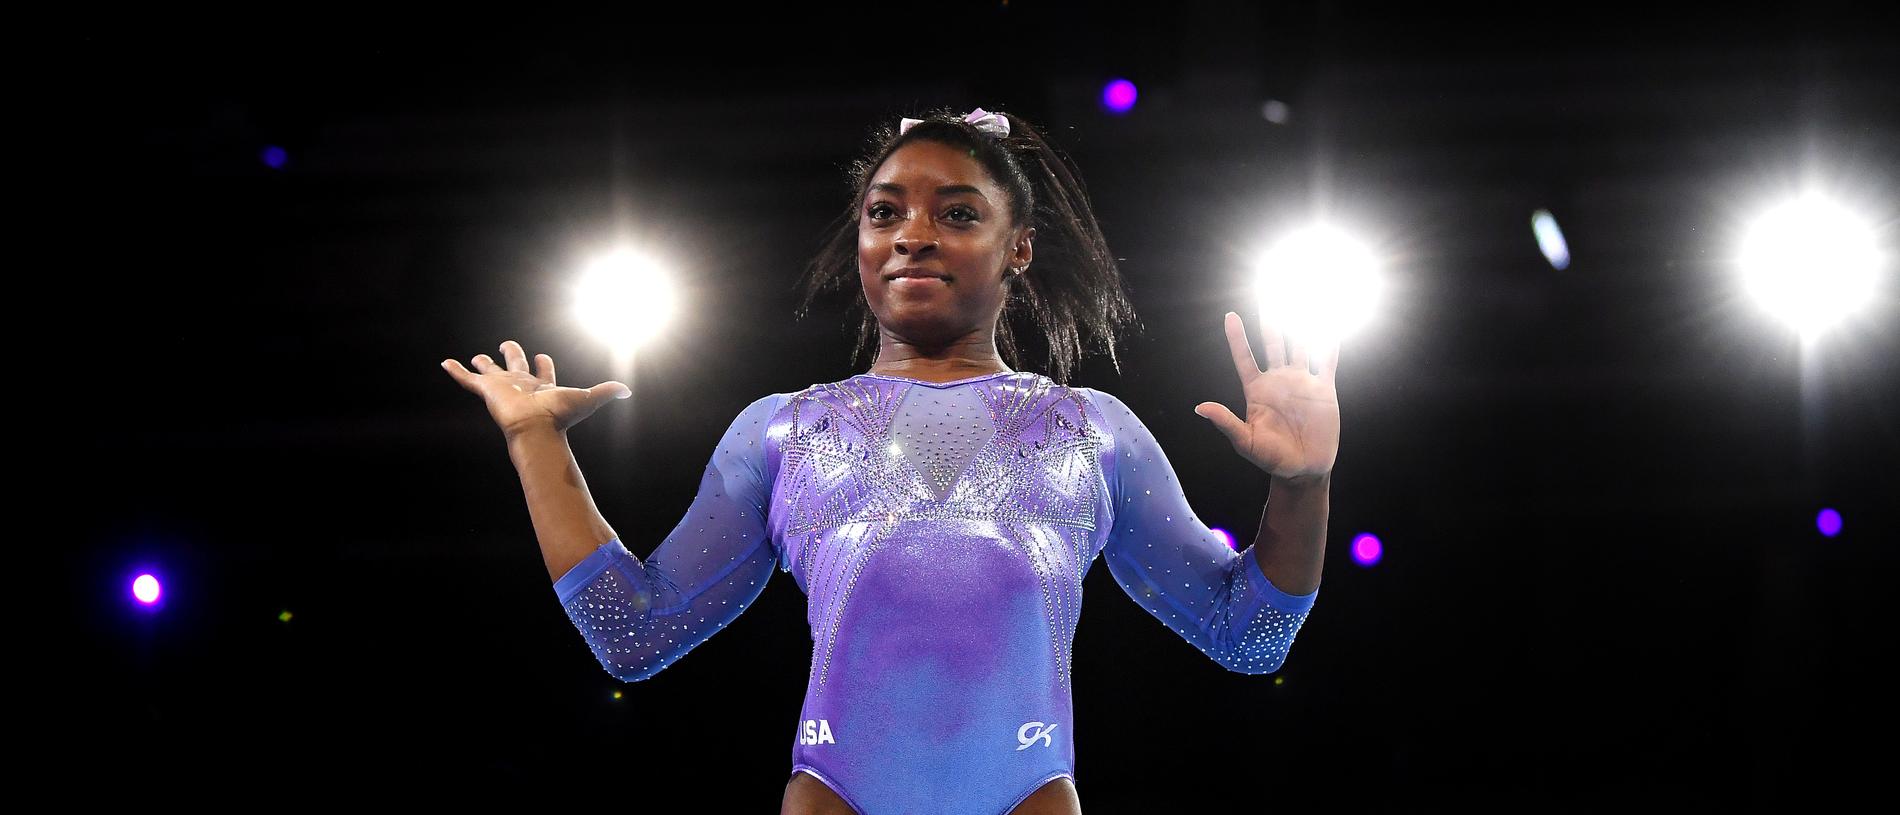 Tokyo Olympics 2021 Team Usa Simone Biles Could Become Best Athlete At Summer Games Gymnastics